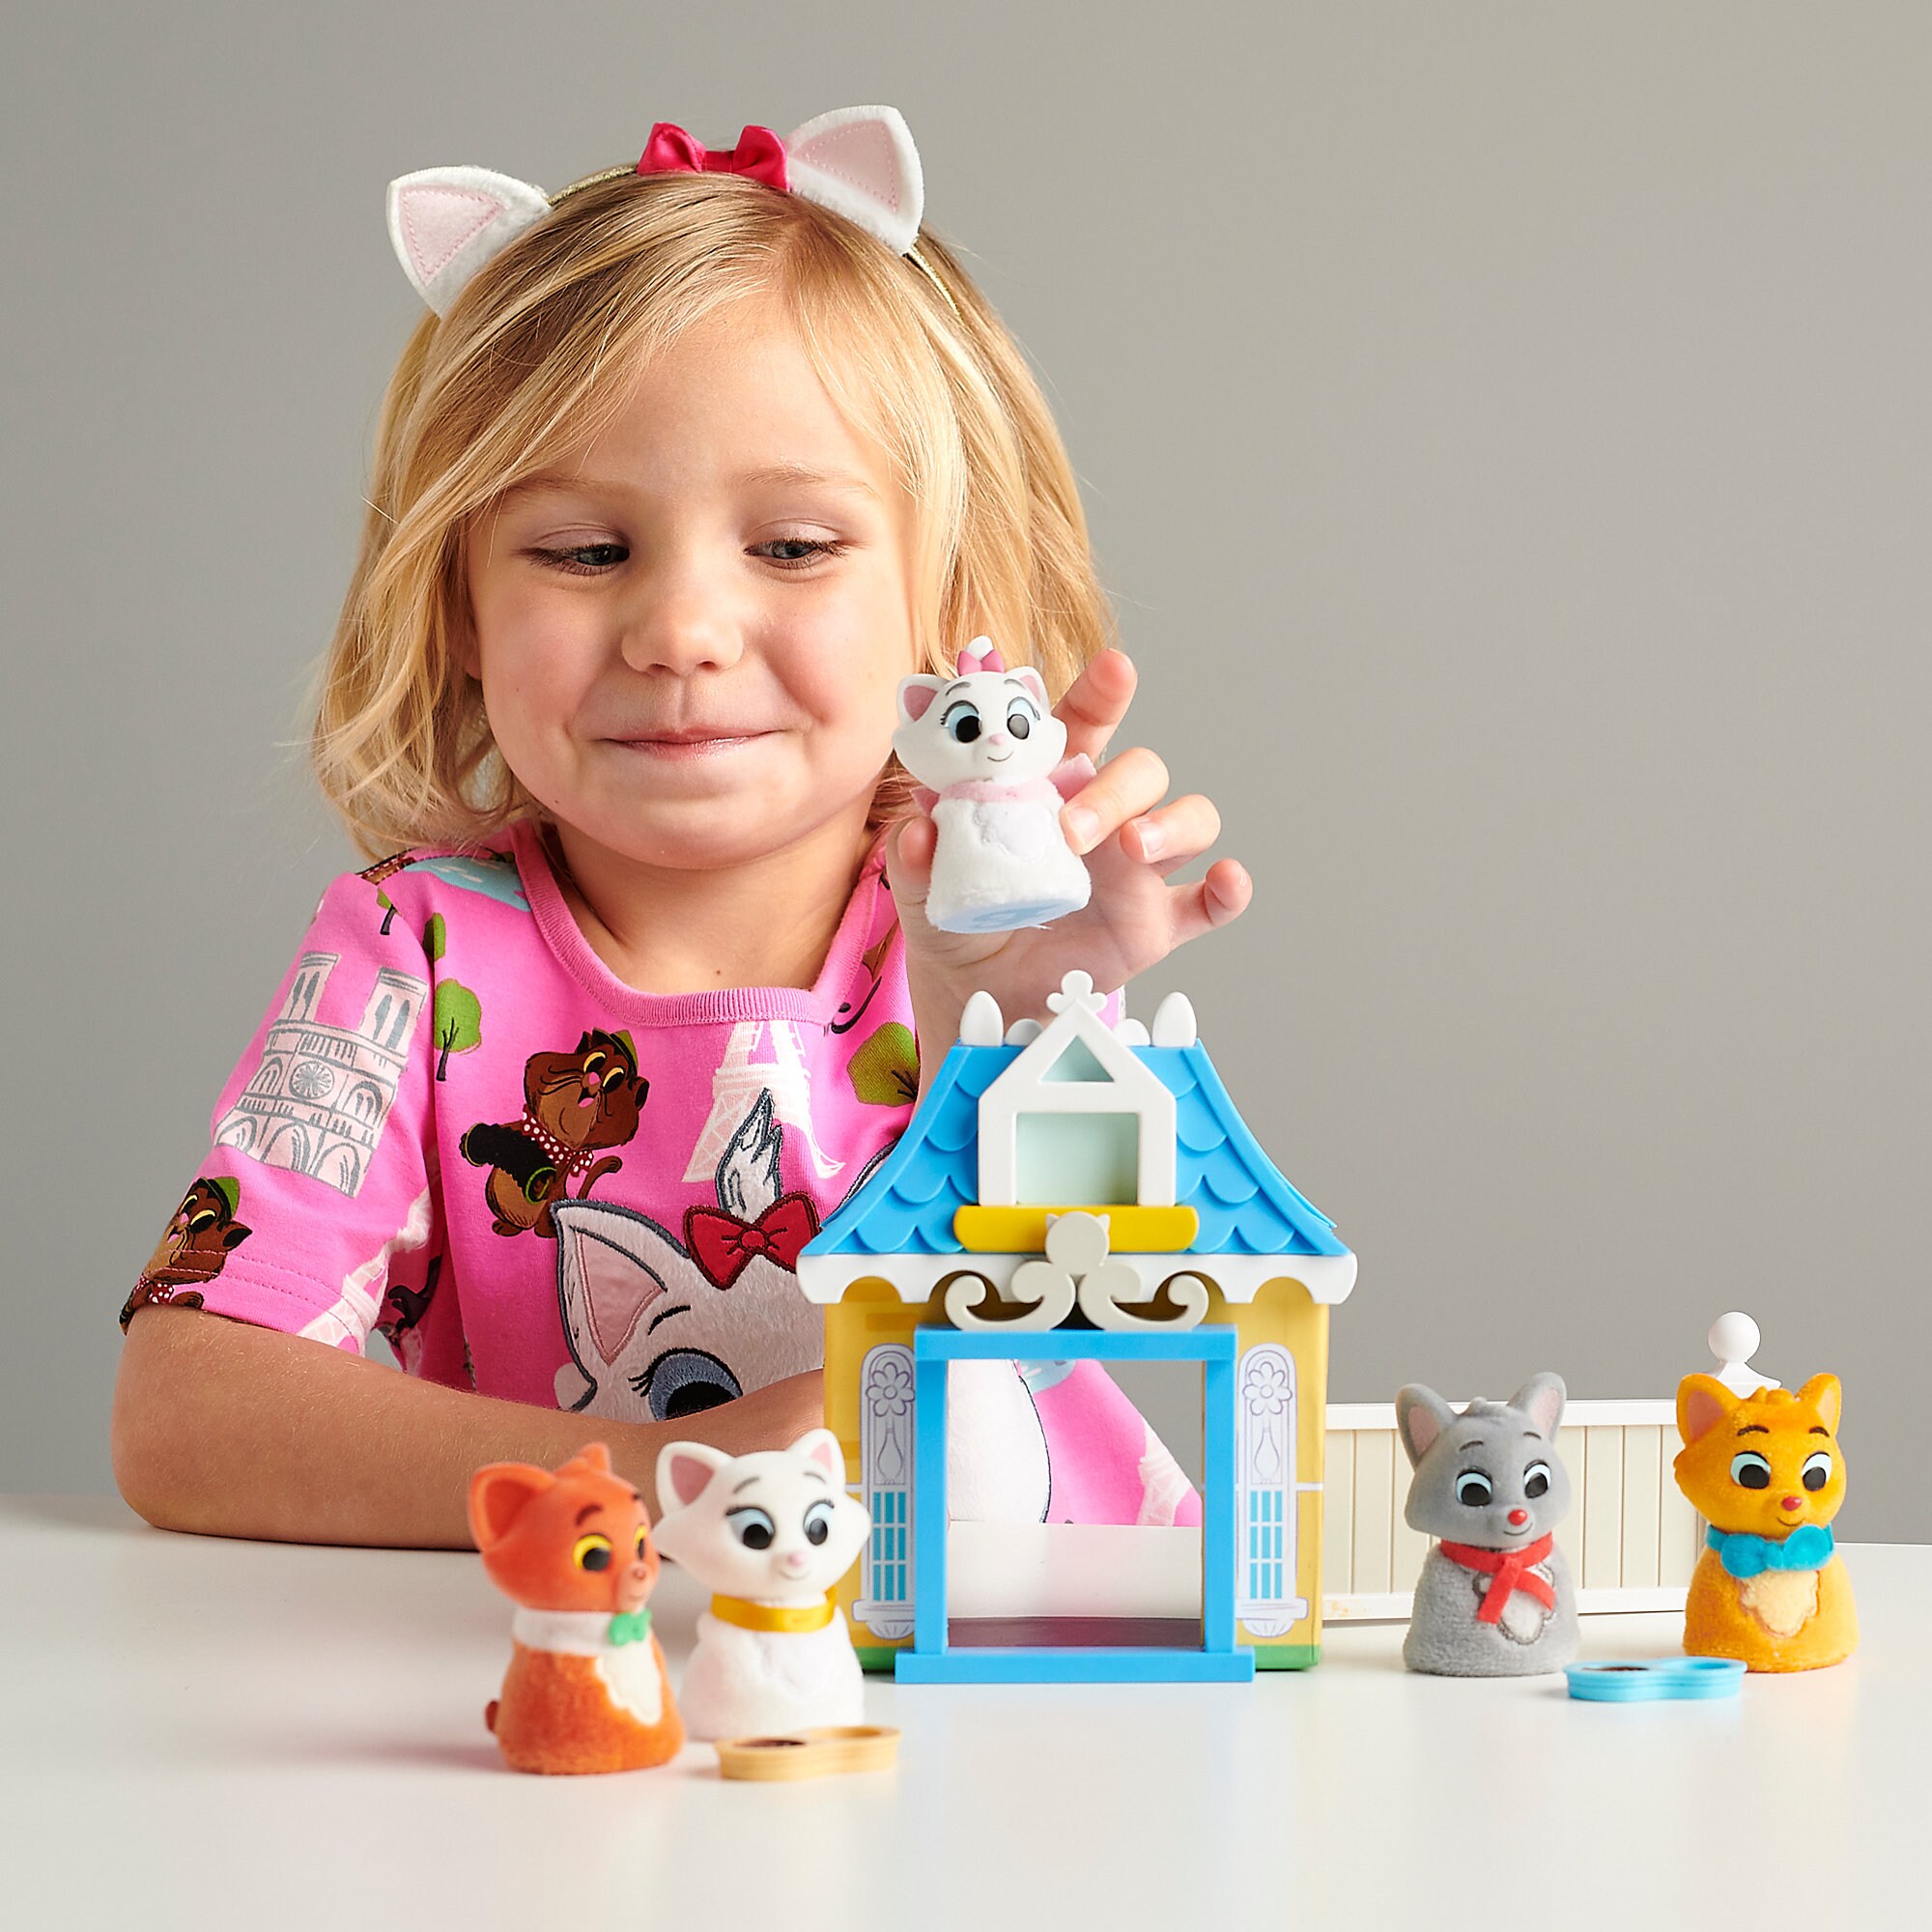 Aristocats Family Pack Playset - Disney Furrytale friends